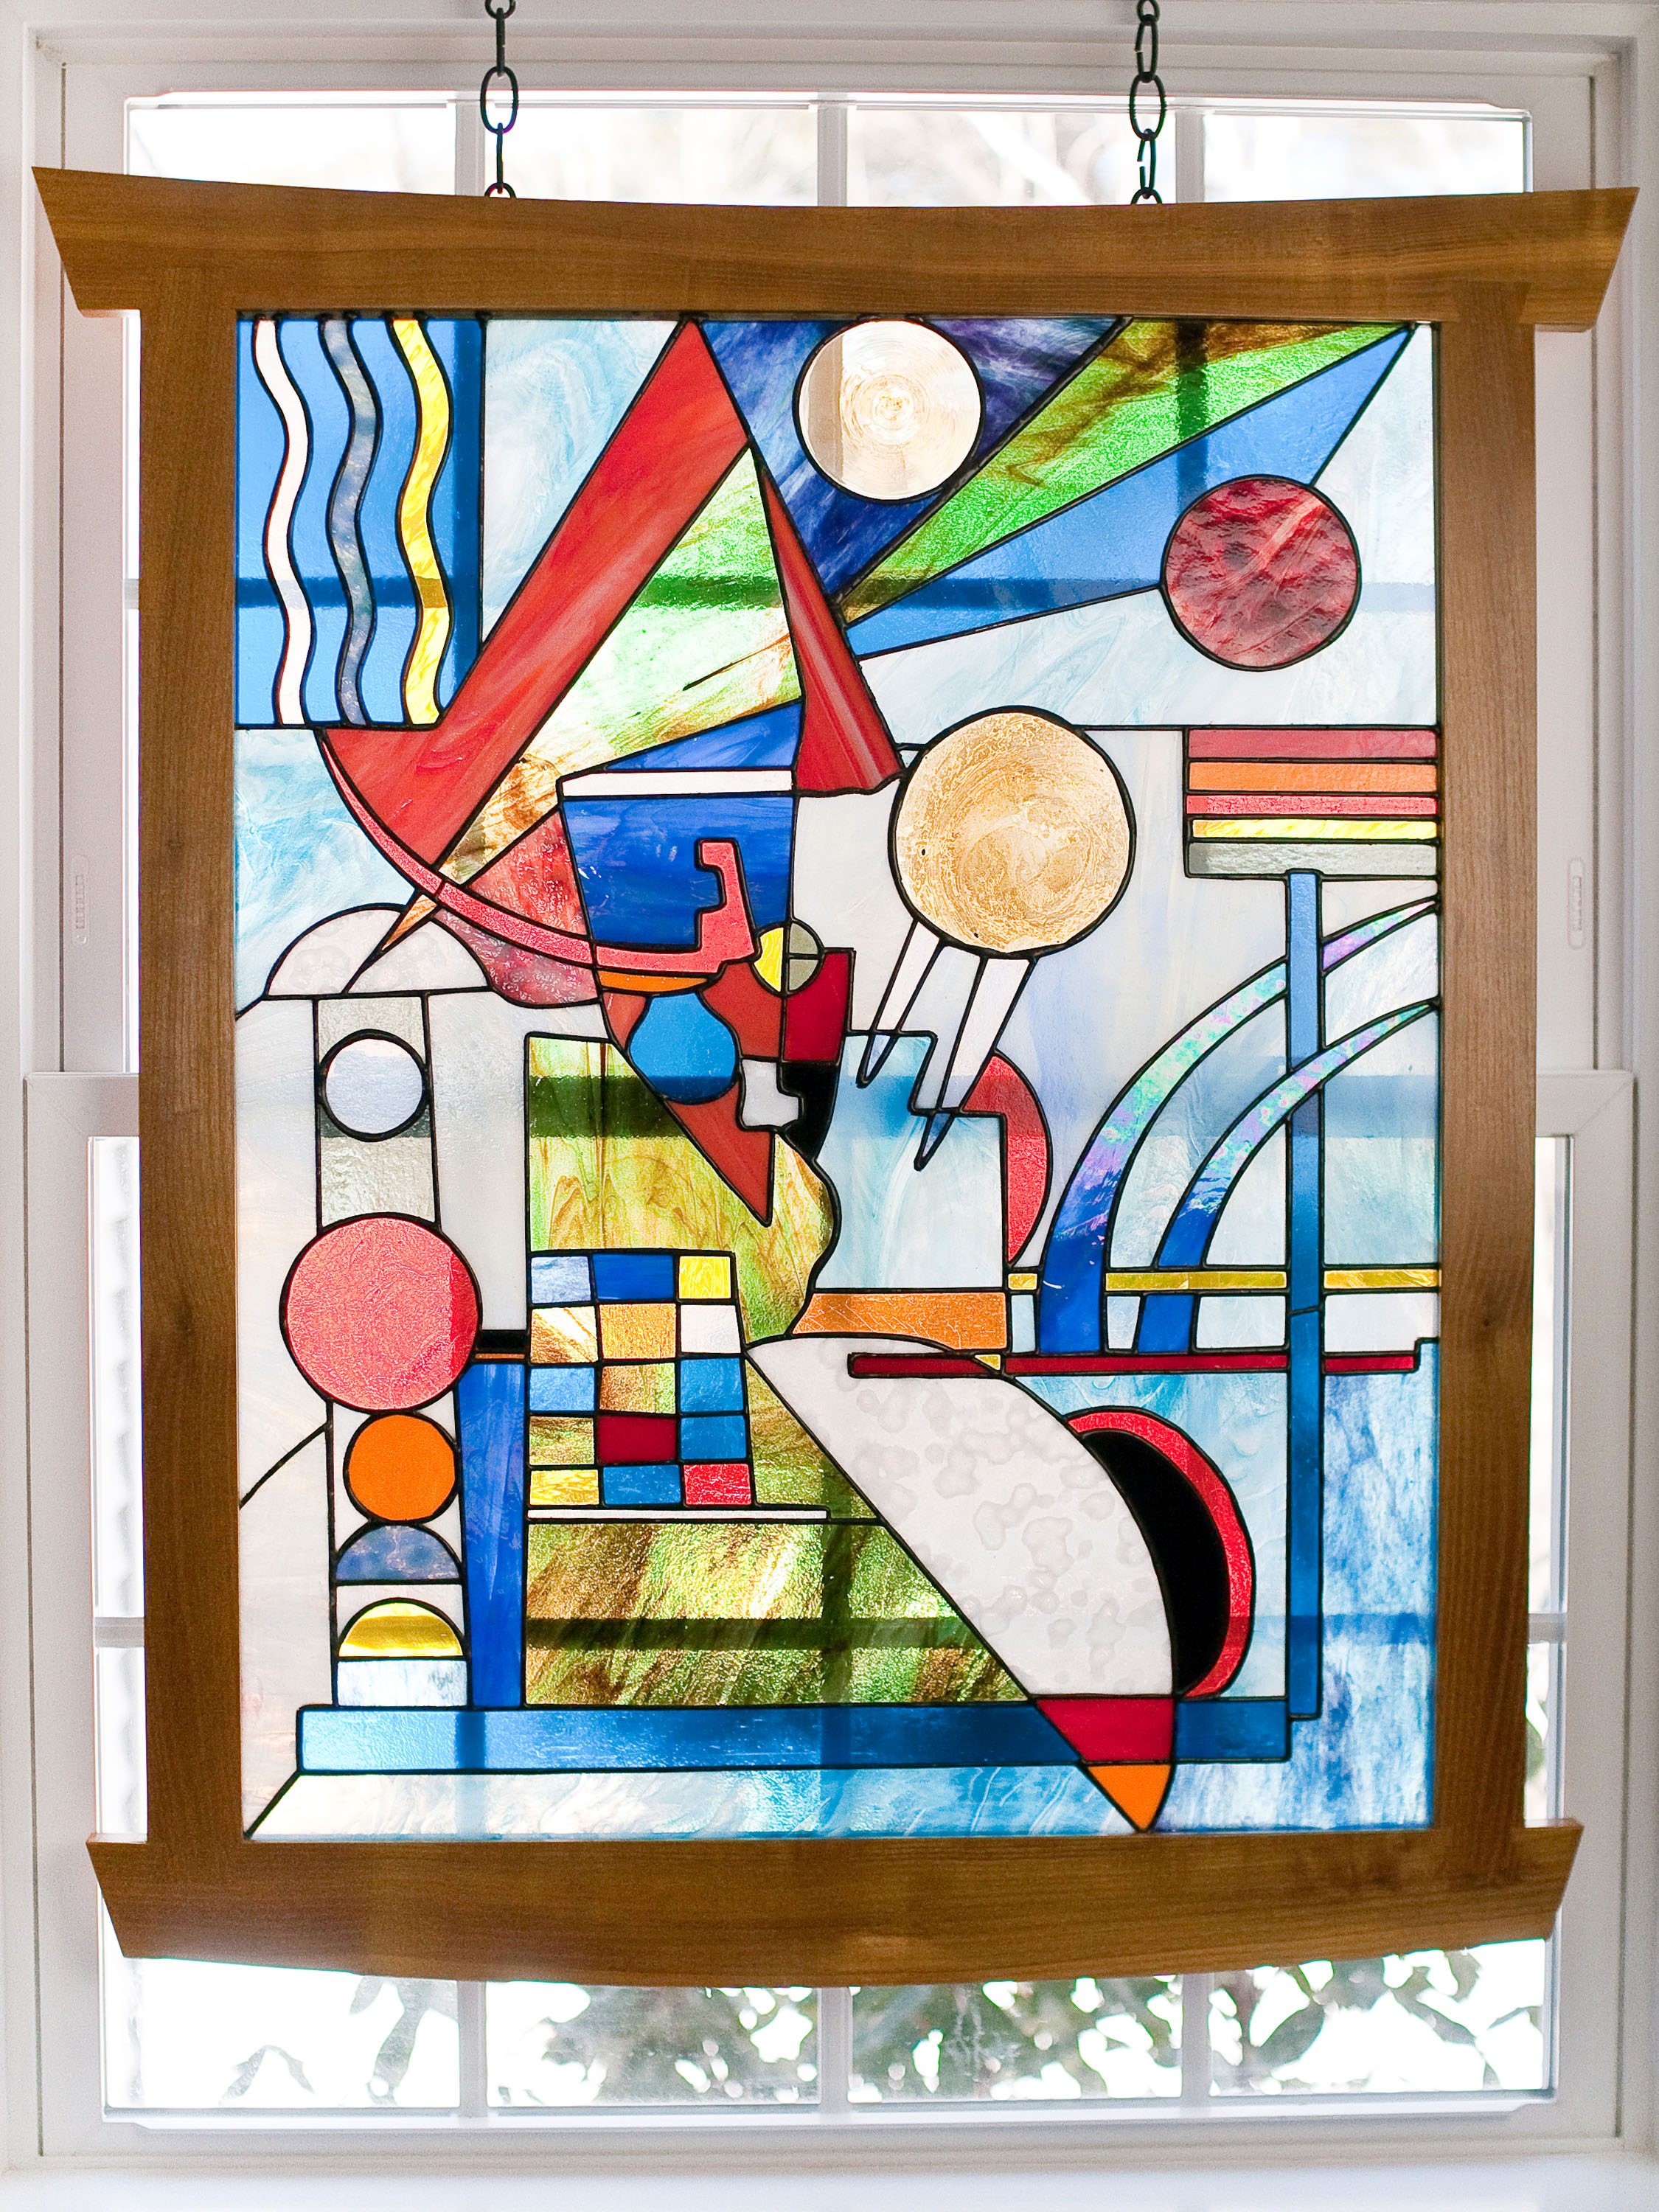 Stained glass frame 1.jpg